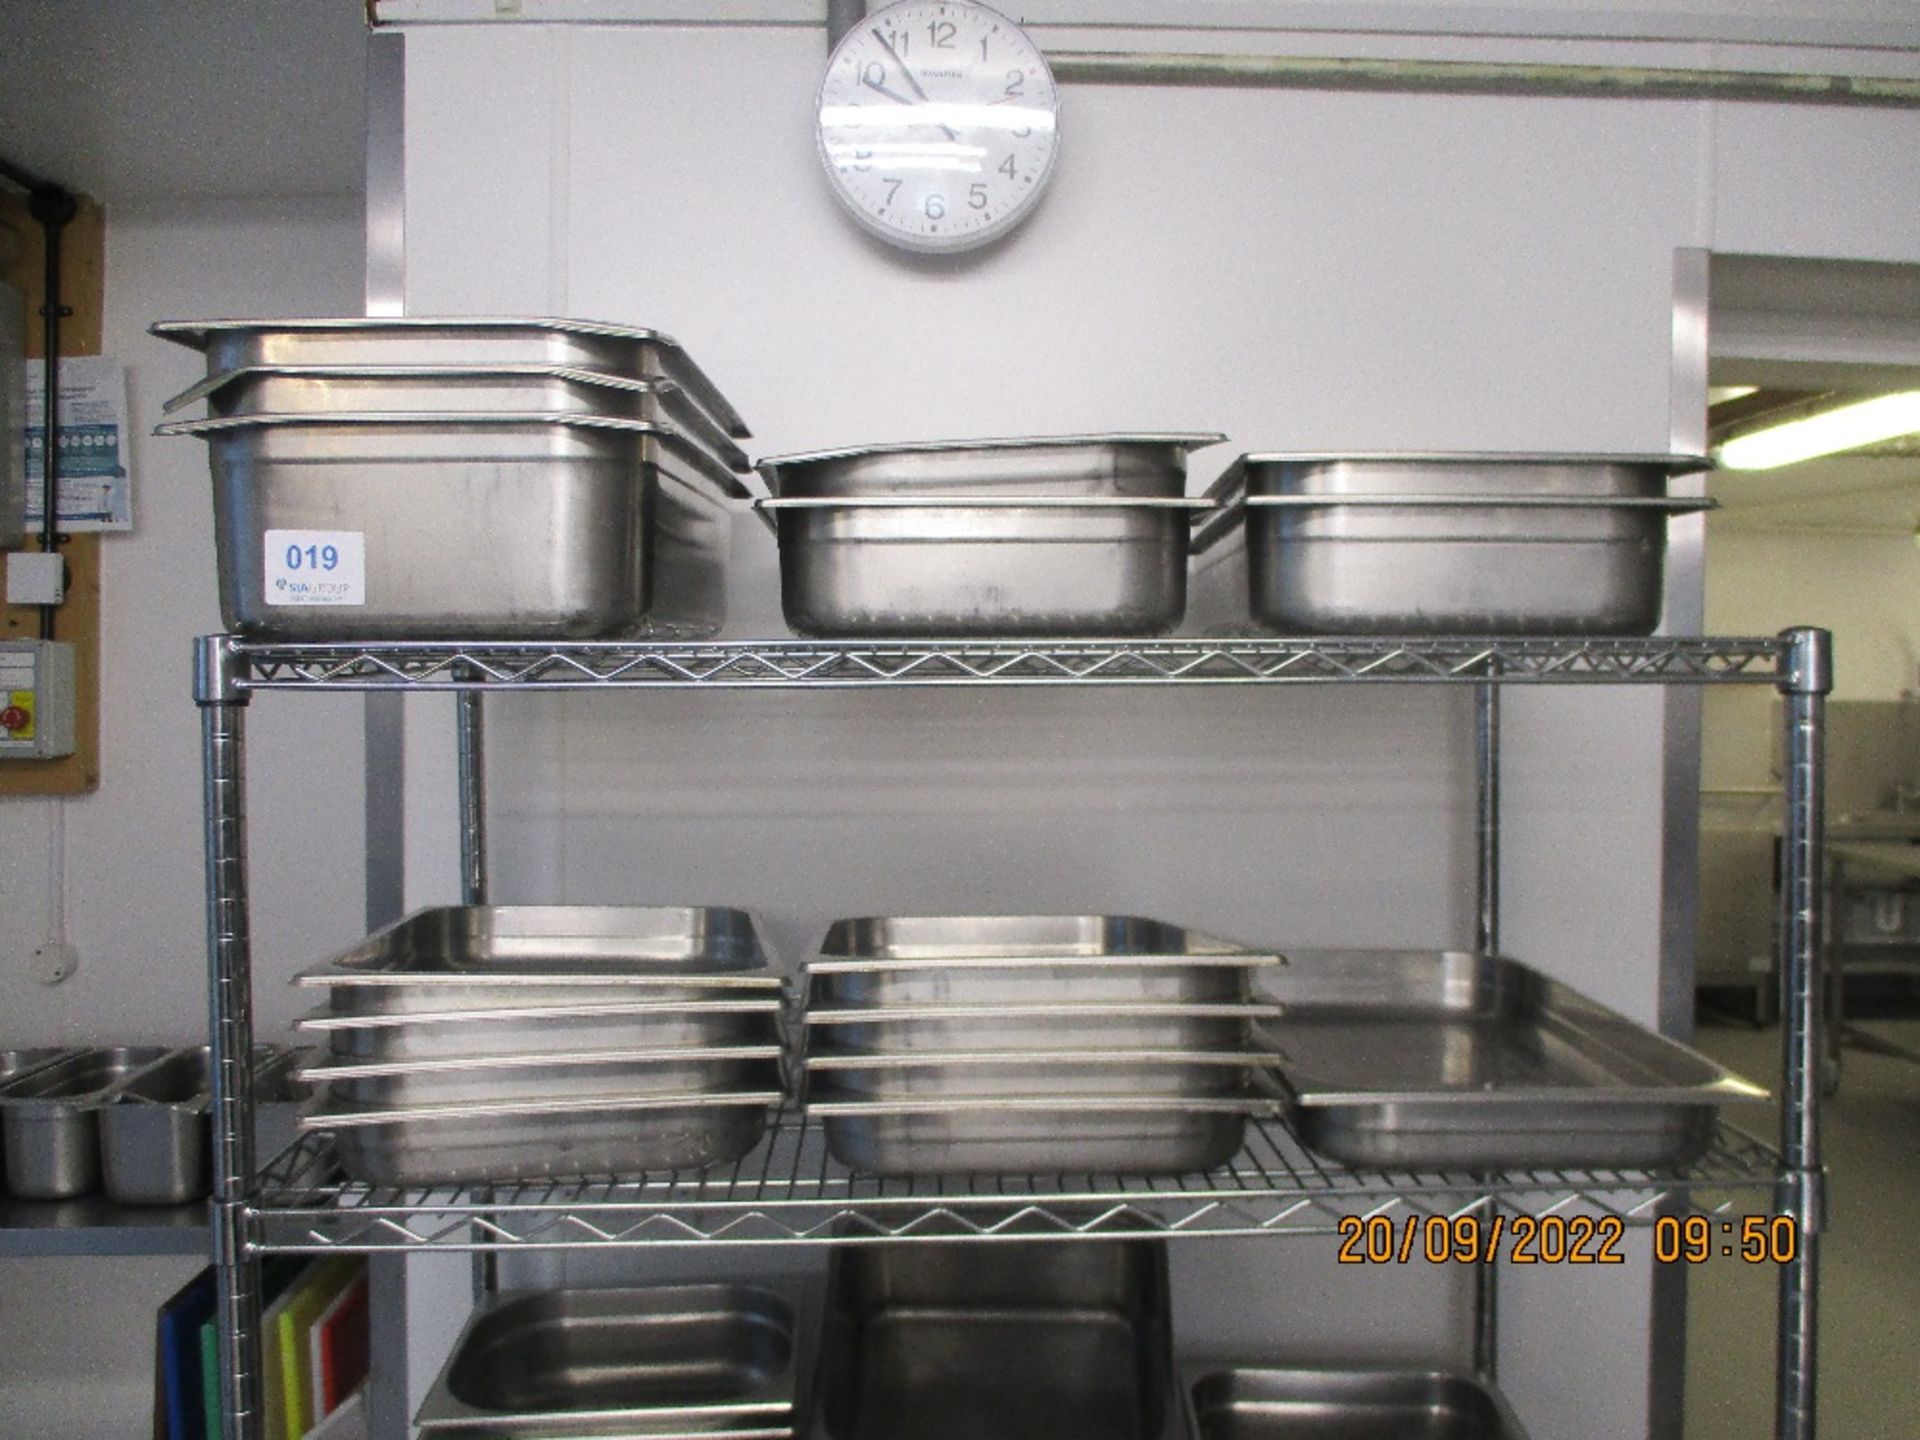 Stainless Steel Racks with Contents - Image 2 of 4